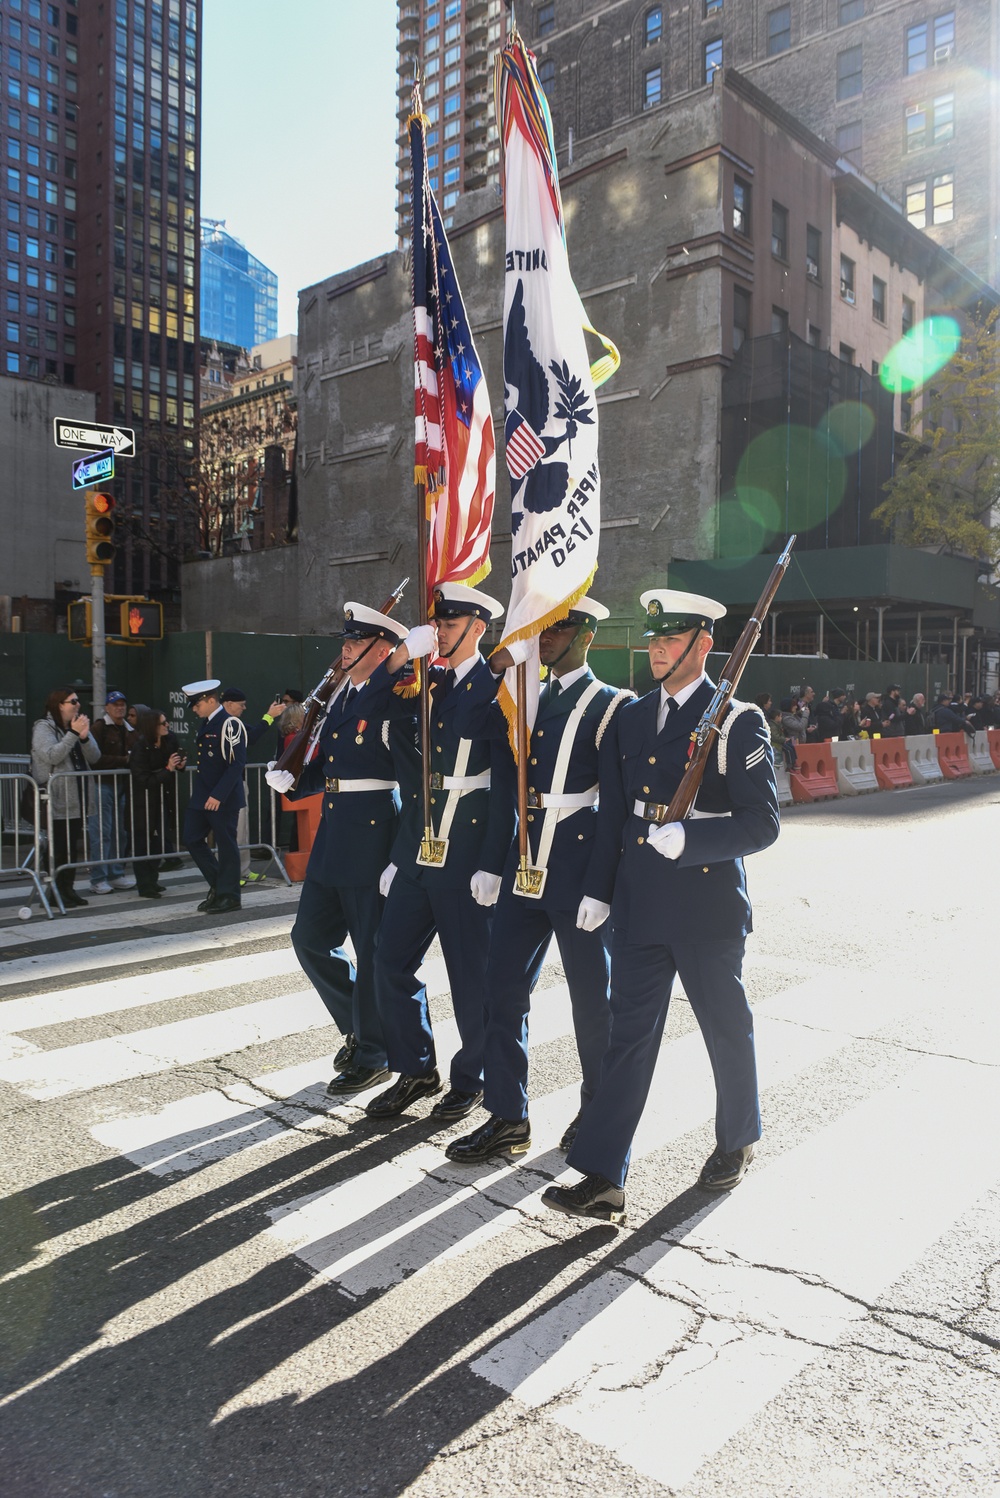 DVIDS Images U.S. Coast Guard honored in New York City Veterans Day